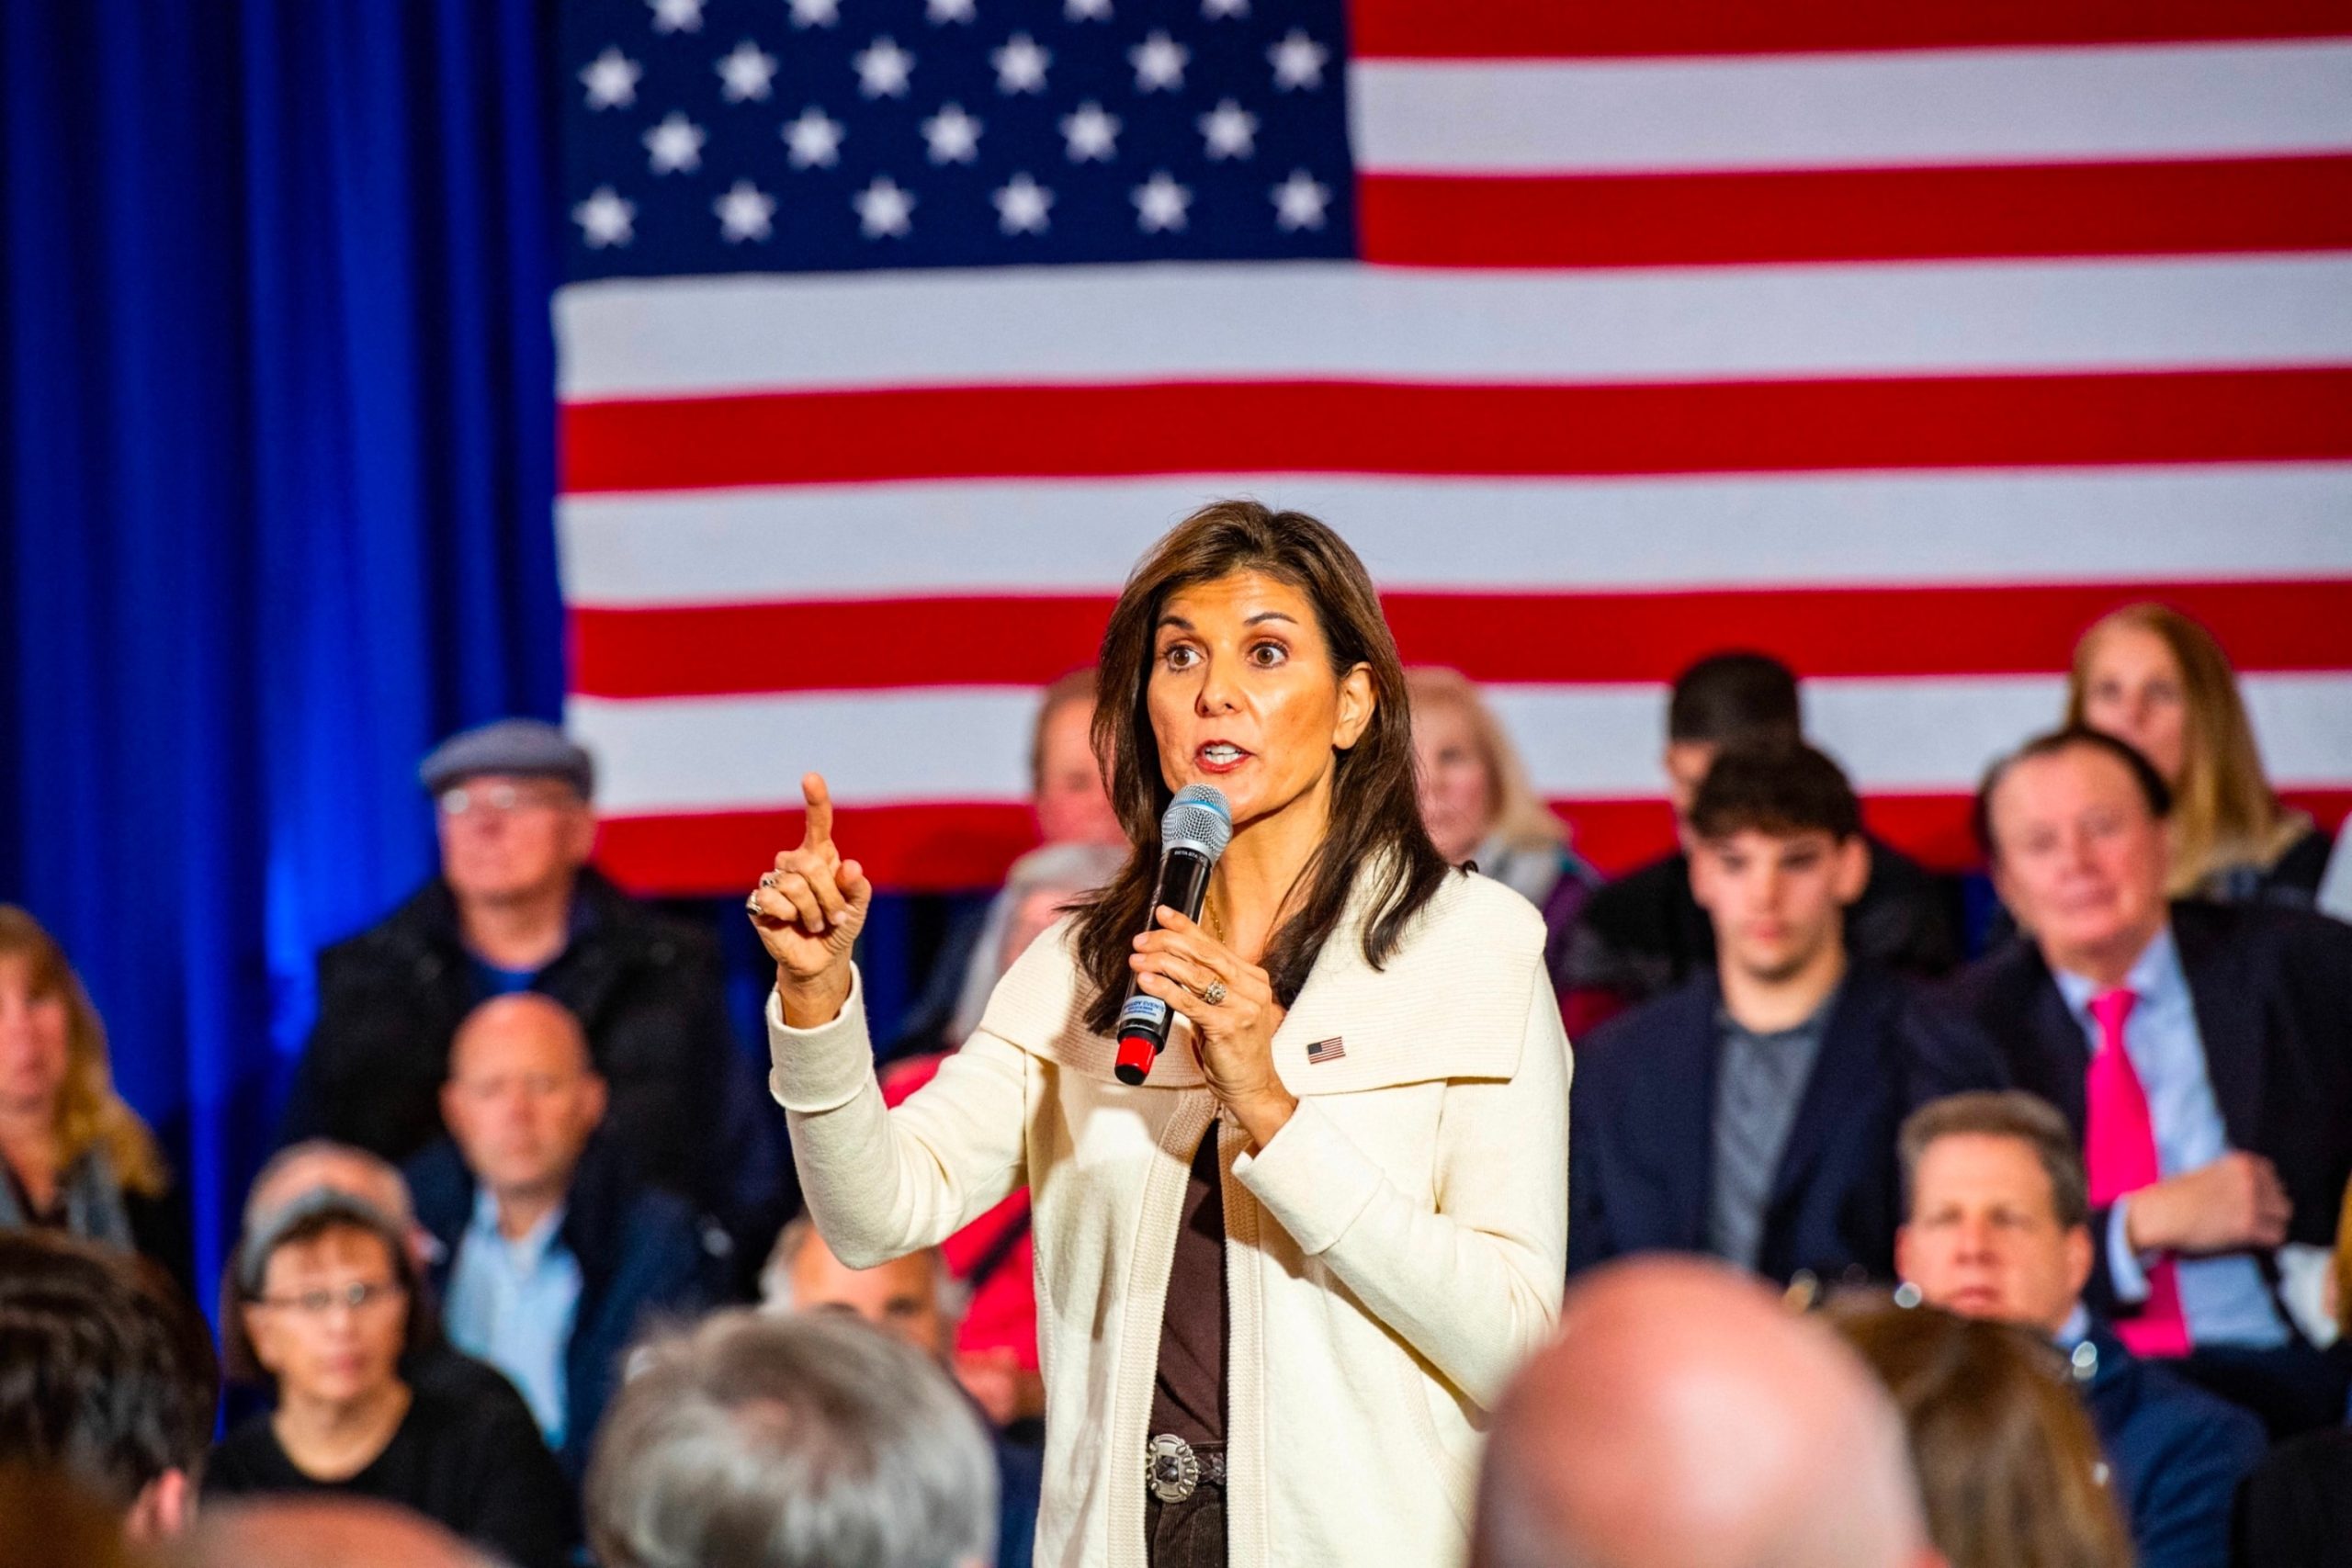 Haley's Support Grows in New Hampshire as Primary Approaches: Polls Indicate Narrowing Margin with Trump